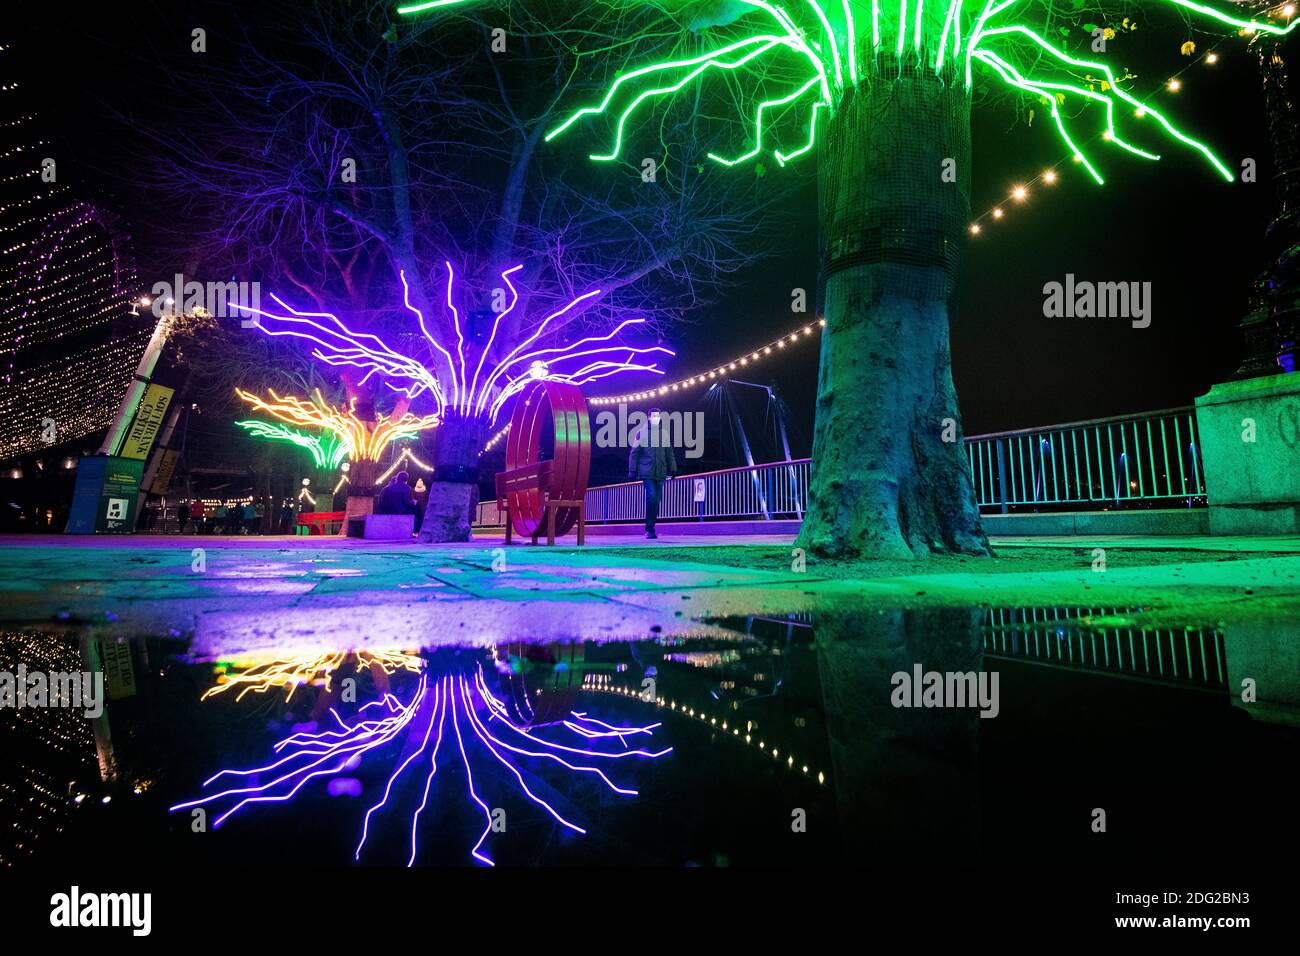 A pedestrian passes 'Lumen' by David Ogle, a row of riverside plane trees illuminated by neon flex, part of 'Winter Light', a new open-air exhibition at the Southbank Centre in London, which features over 15 artworks and new commissions that make use of light, colour and animation from a number of international artists. Stock Photo